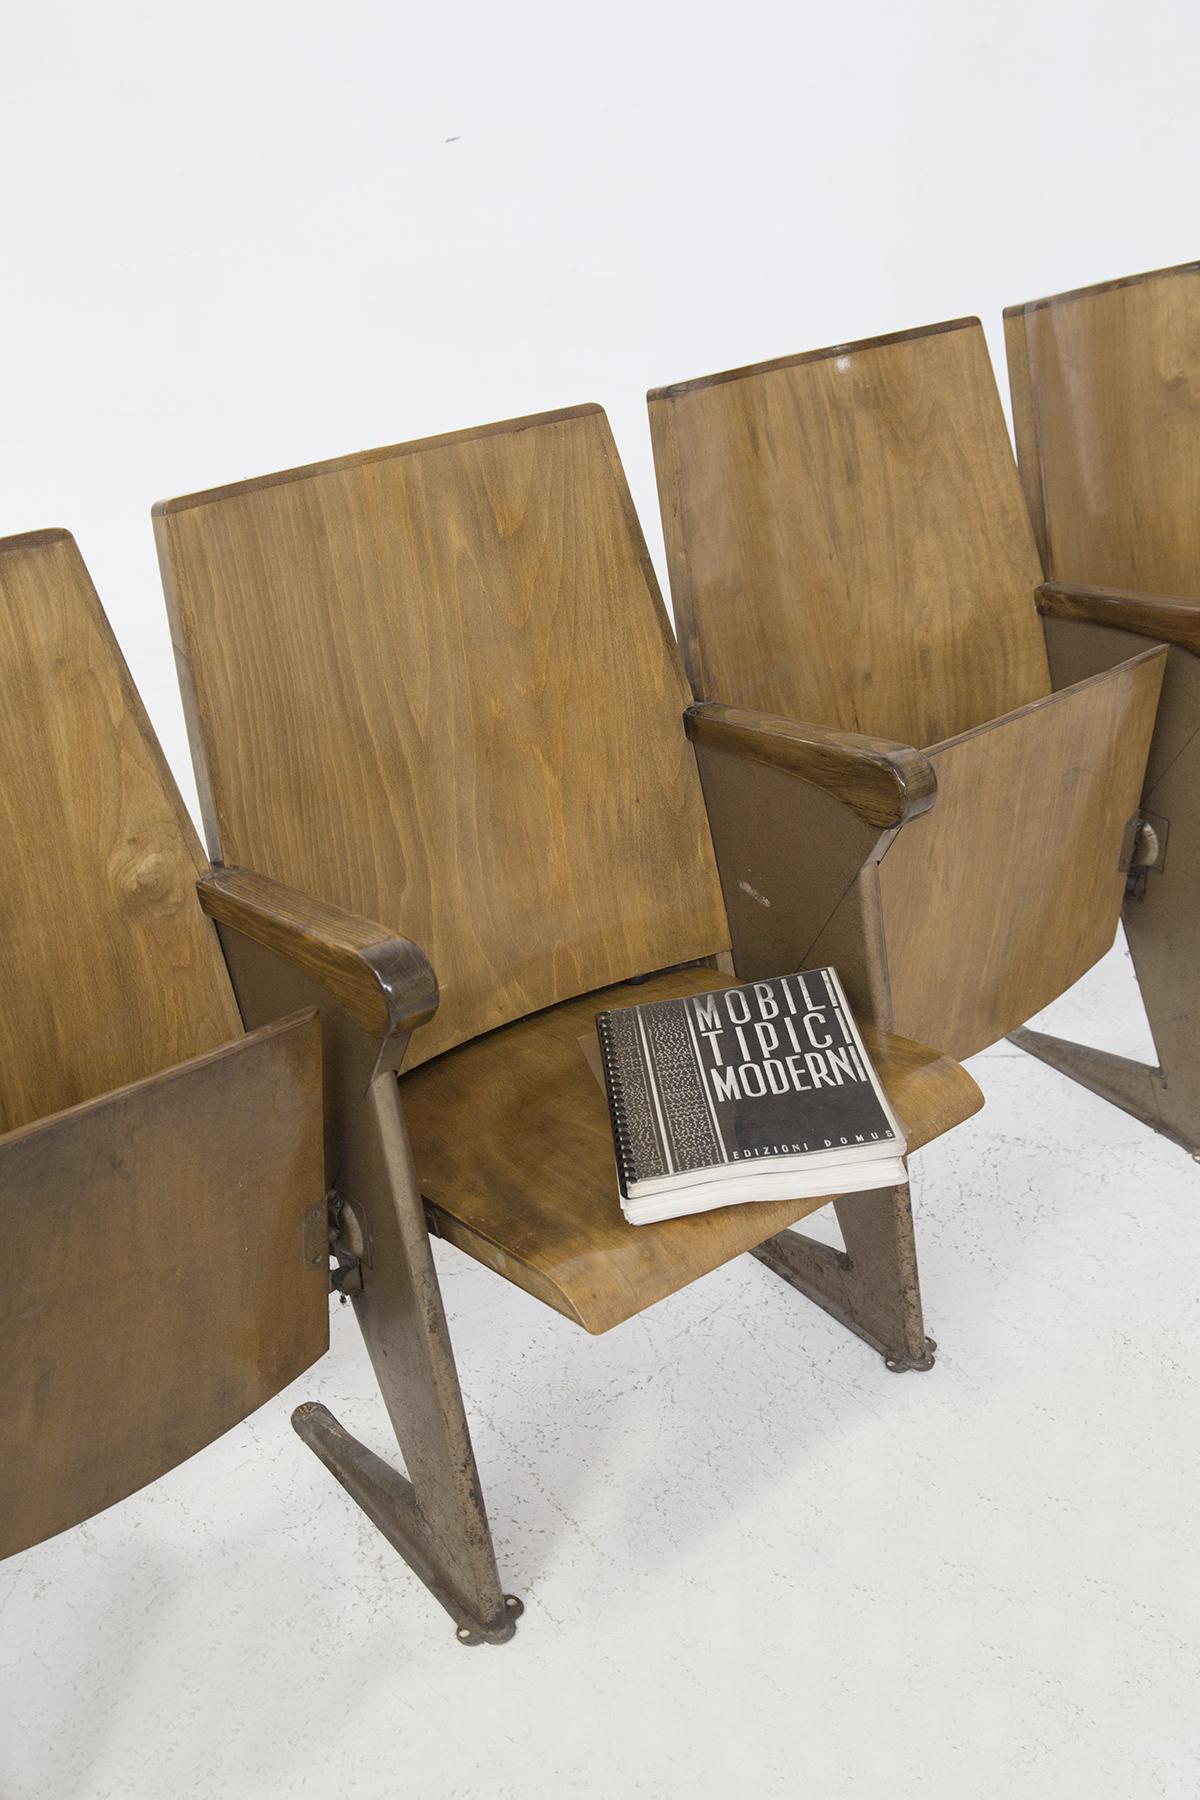 Rare cinema chairs made by Gastone Rinaldi for the theater IL Piccolo Milano in 1952. The model in question is LV 4.
The five cinema or theater armchairs is one of the earliest examples for the IL PICCOLO Theater in Milan. They are made of wood for